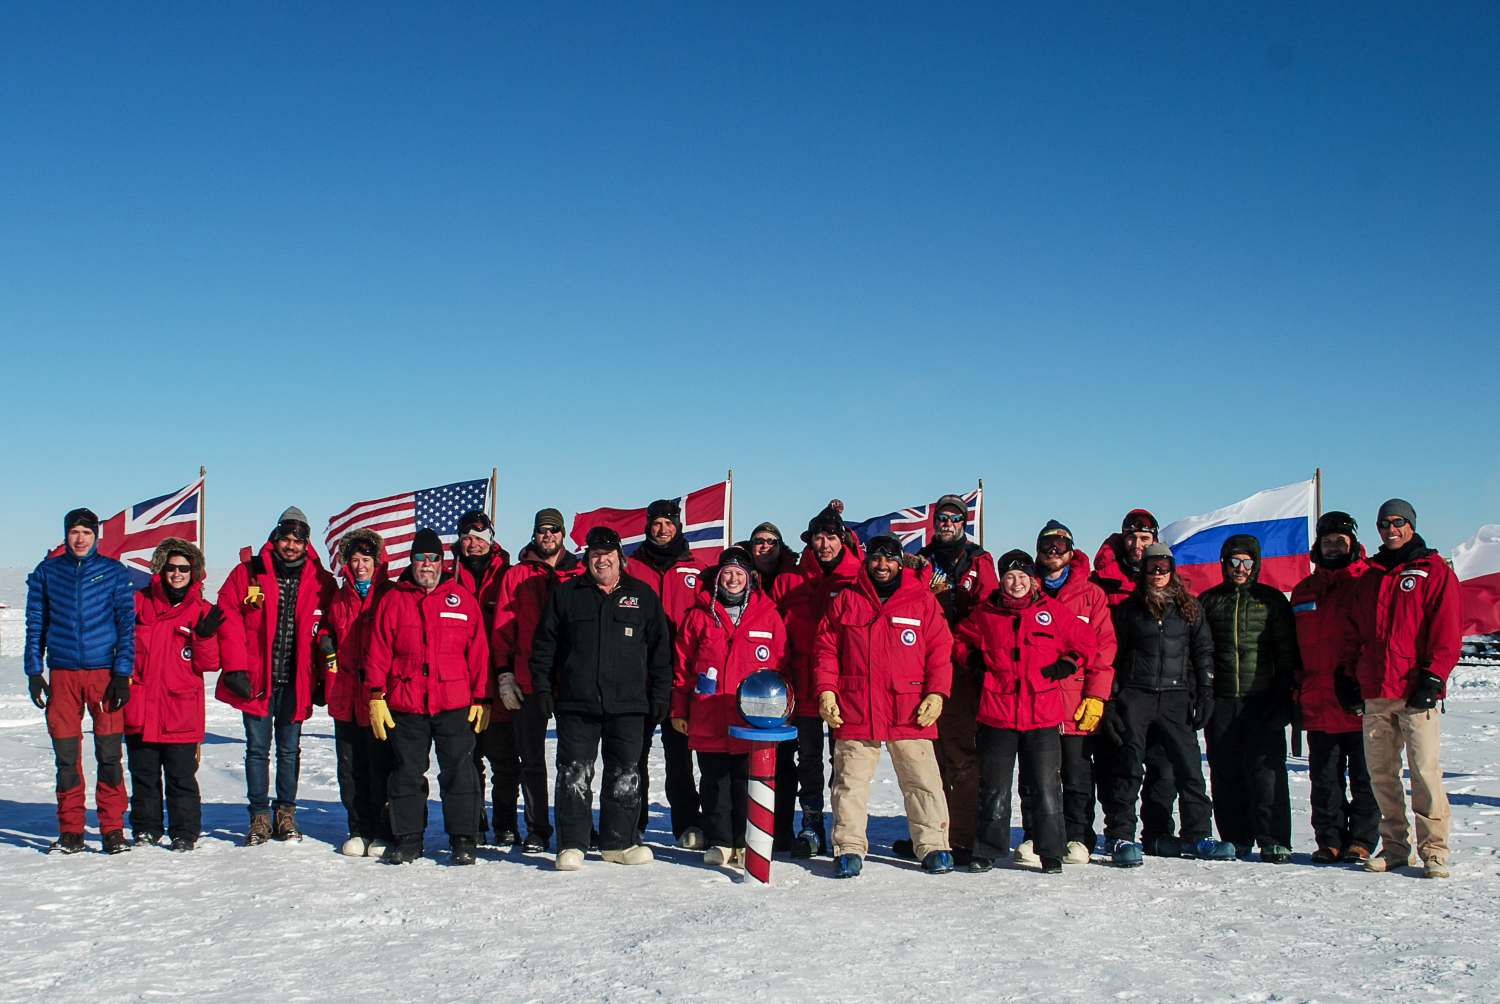 Group photo of 20-plus people at ceremonial pole